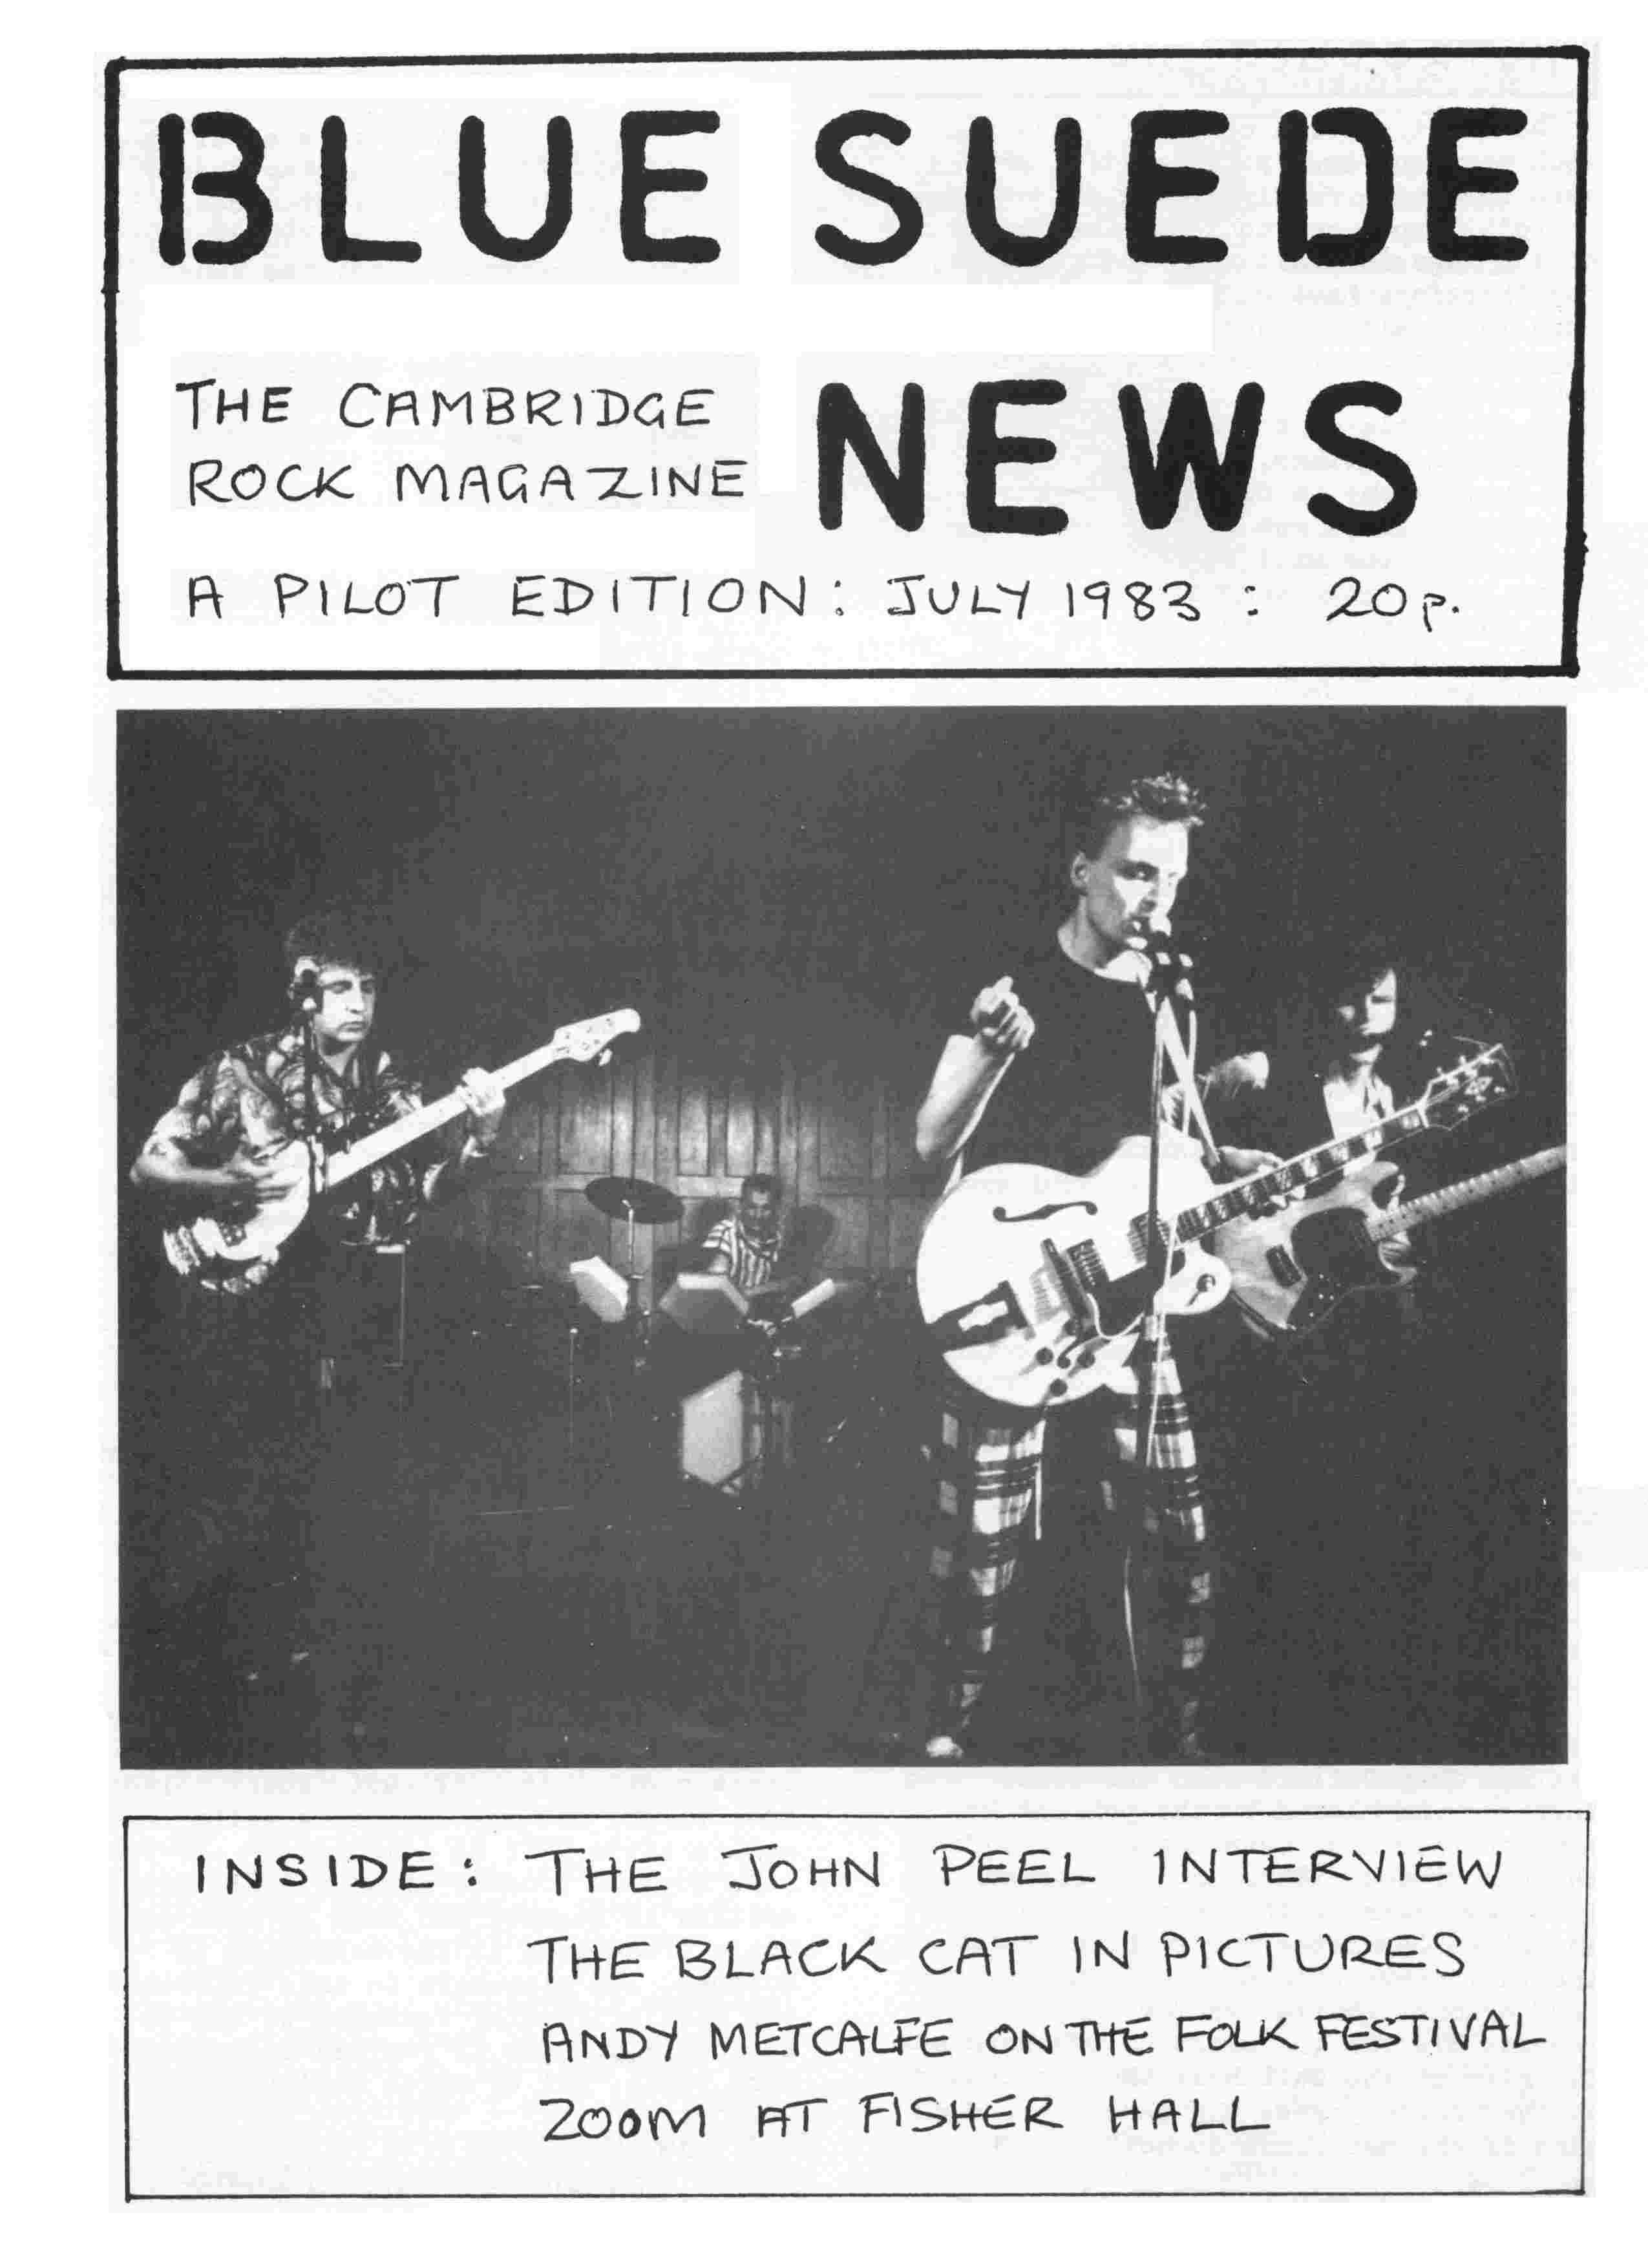 Cover of Blue Suede News pilot edition